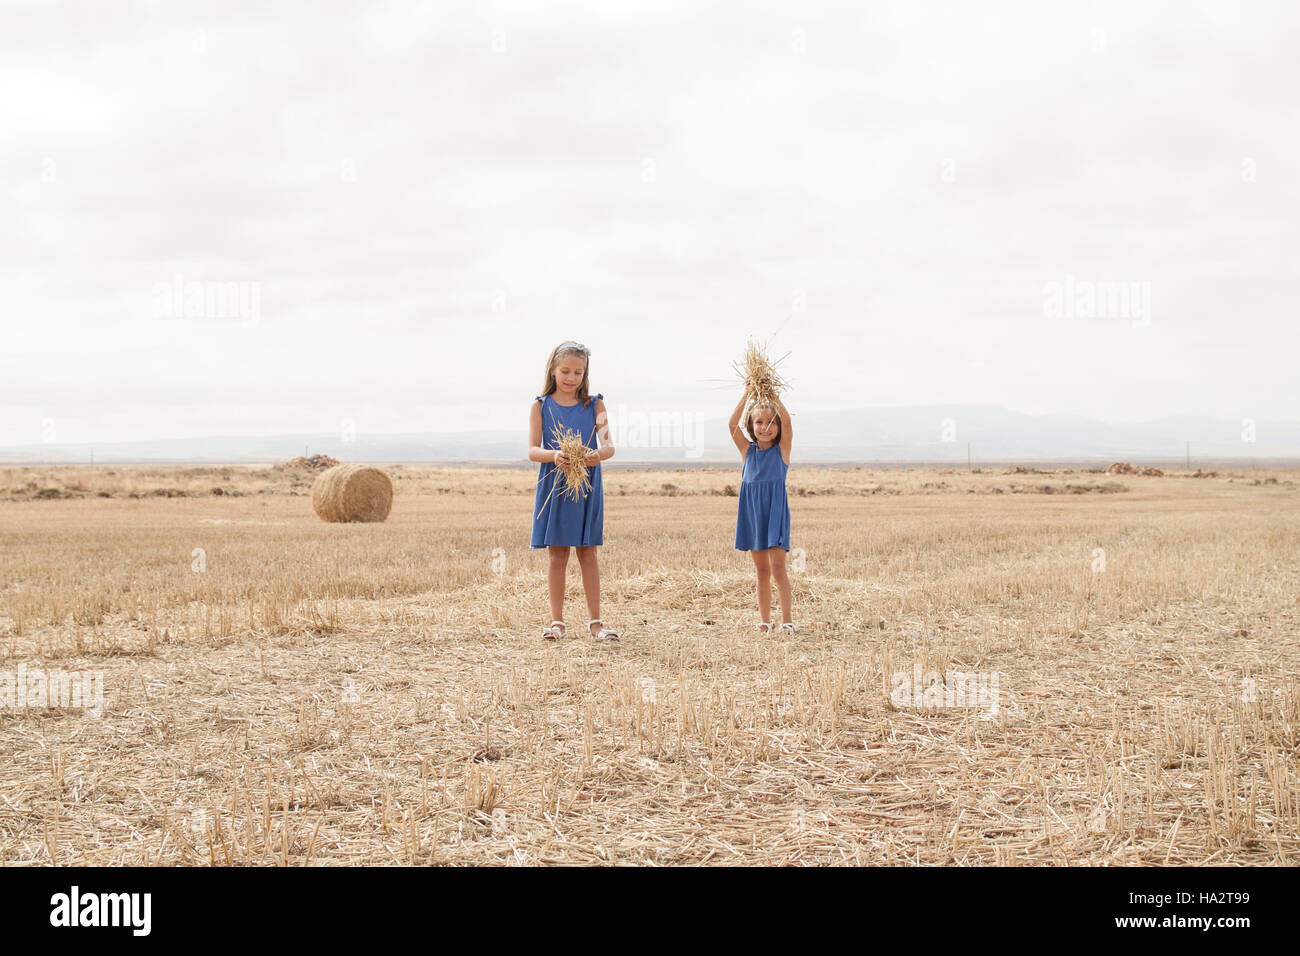 Two girls standing in a field Stock Photo